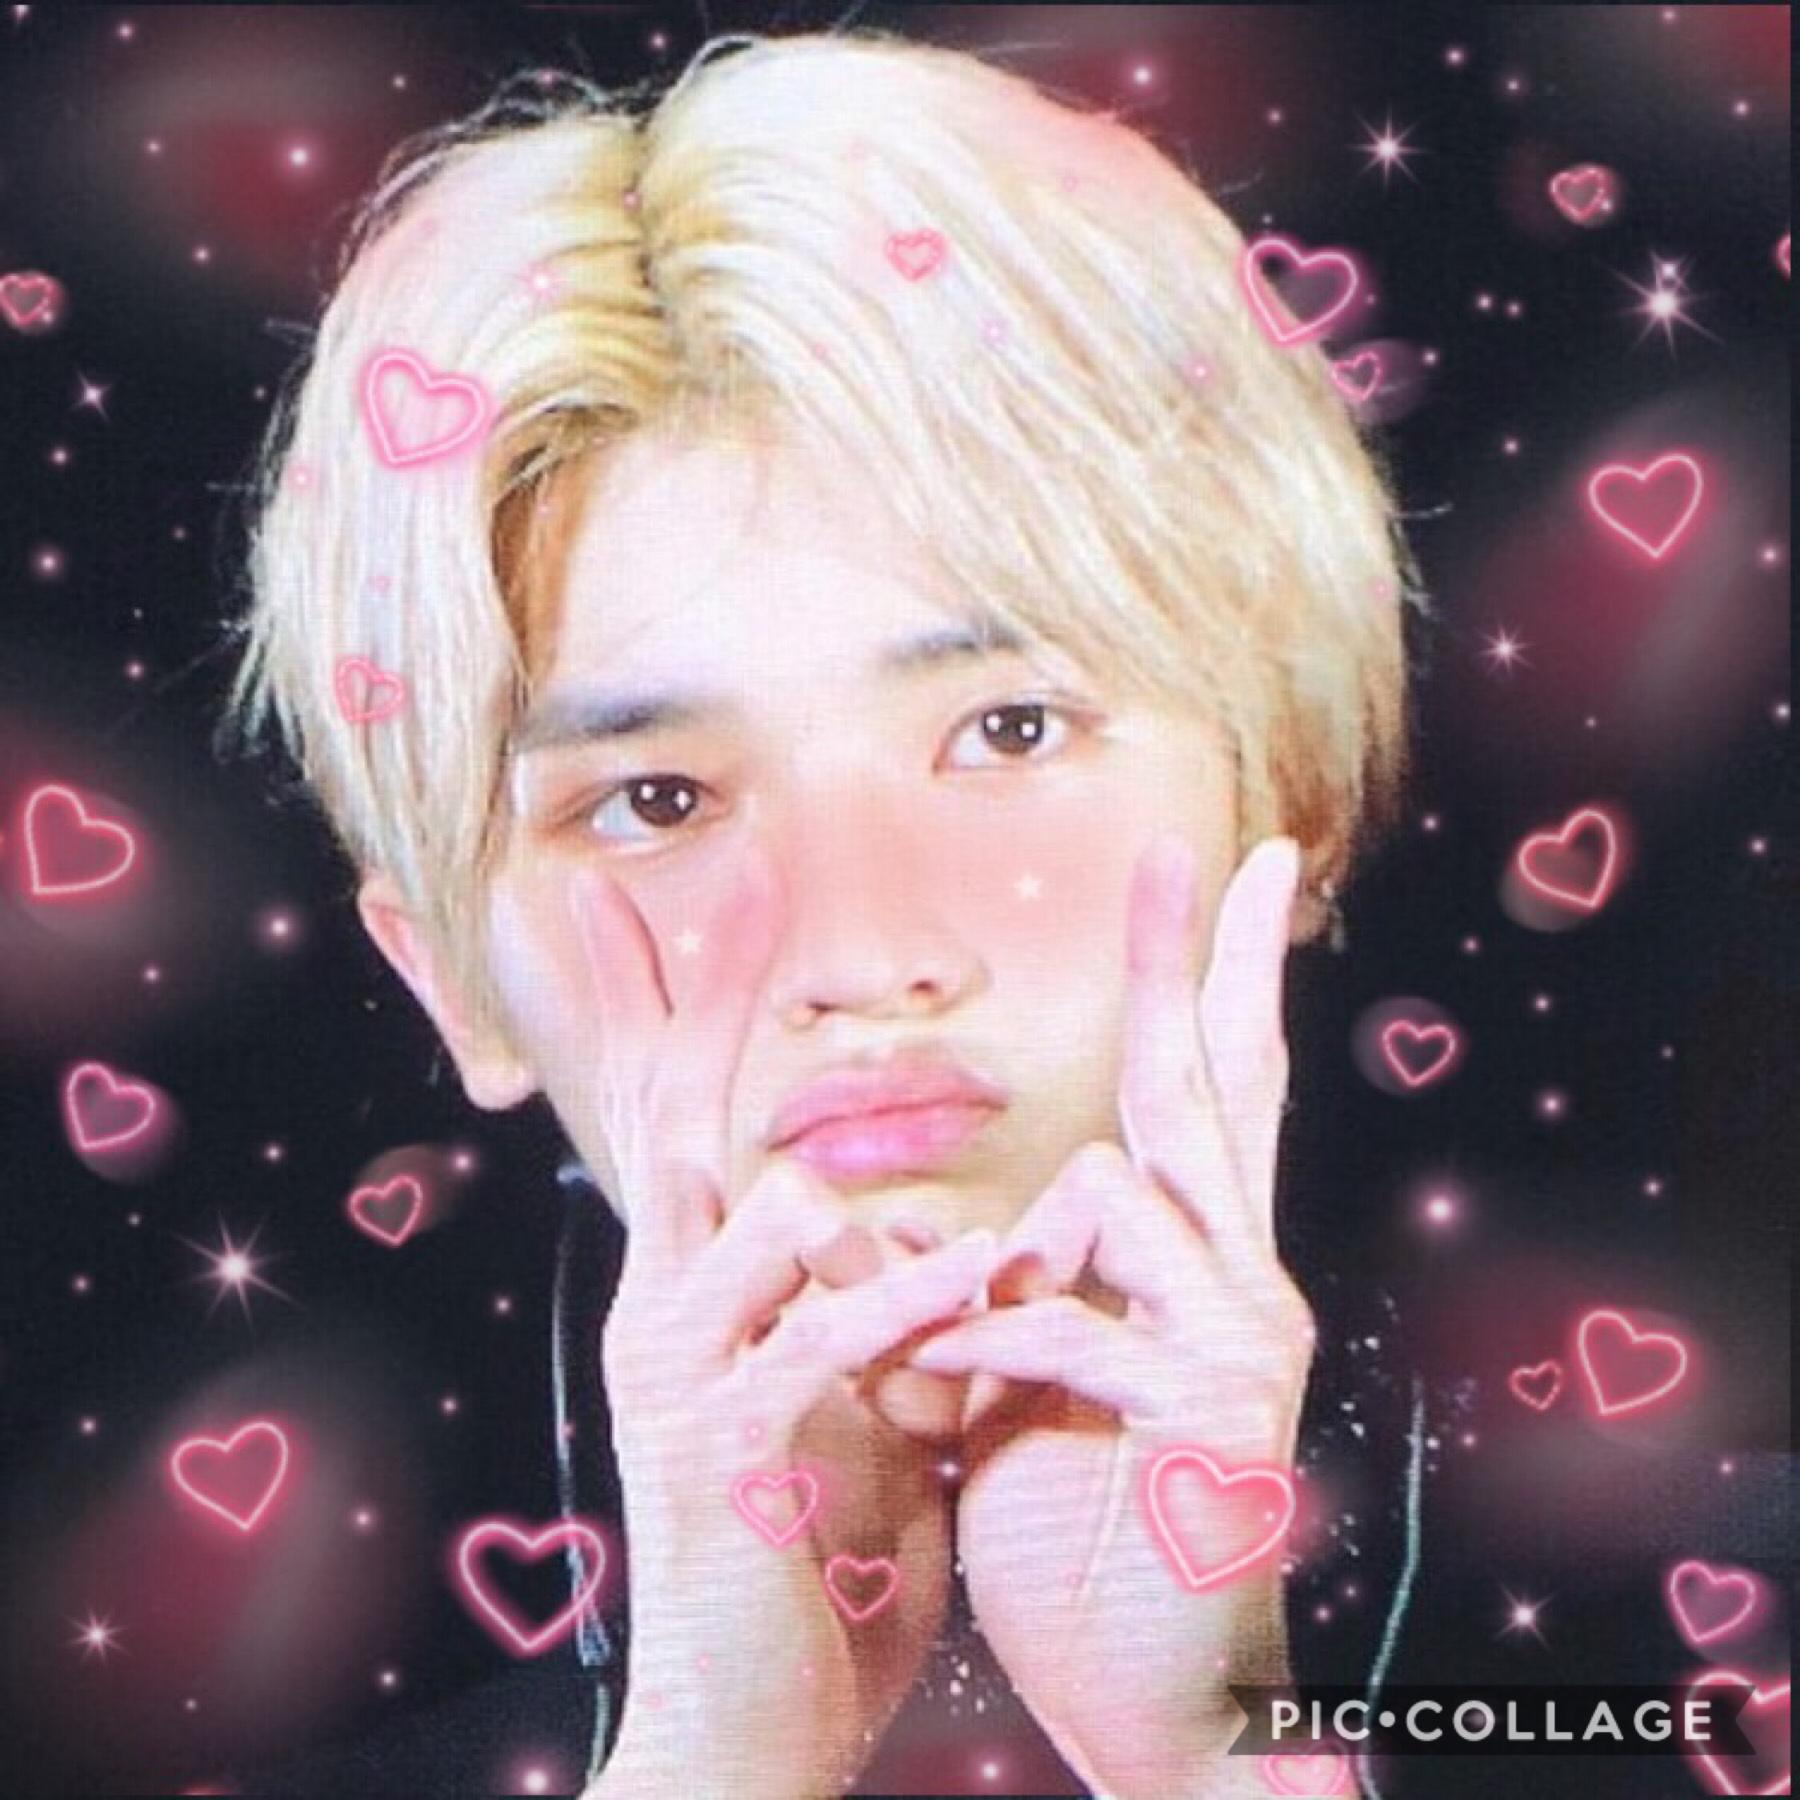 ʚ 𝚃𝚊𝚙 𝚑𝚎𝚛𝚎 ɞ
➯ heyyyy! I hope your day was amazing :))) I made this quick lil edit of taeyong cuz I was bored lol ➯ I’m trying out different fonts for my pics so it might be a little all over the place for a minute 
➯ qotd: who’s your ult bias from nct?